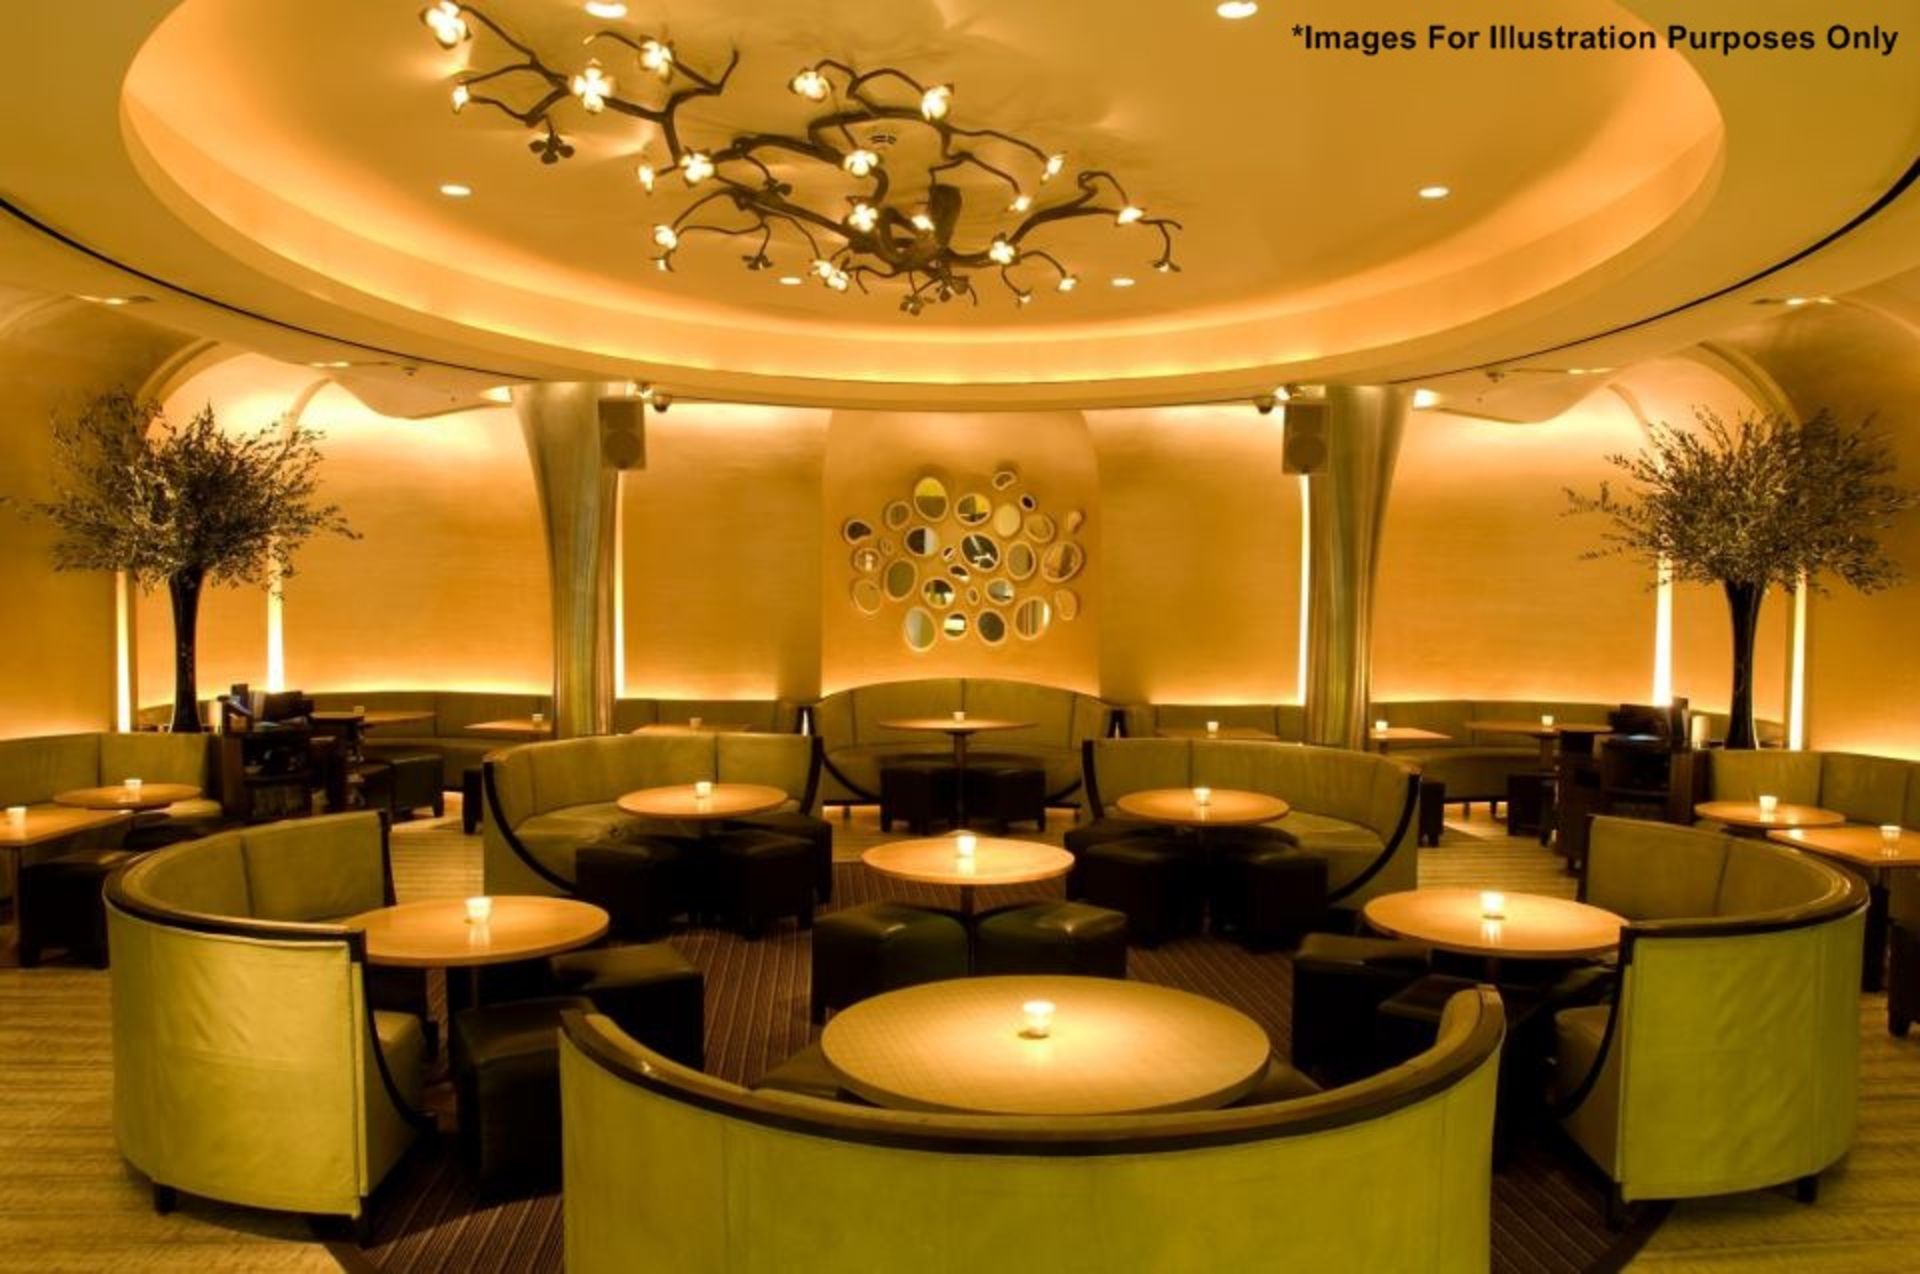 1 x Luxury Upholstered Long Curved Seating Area - Recently Removed From Nobu - Dimensions: W420 x